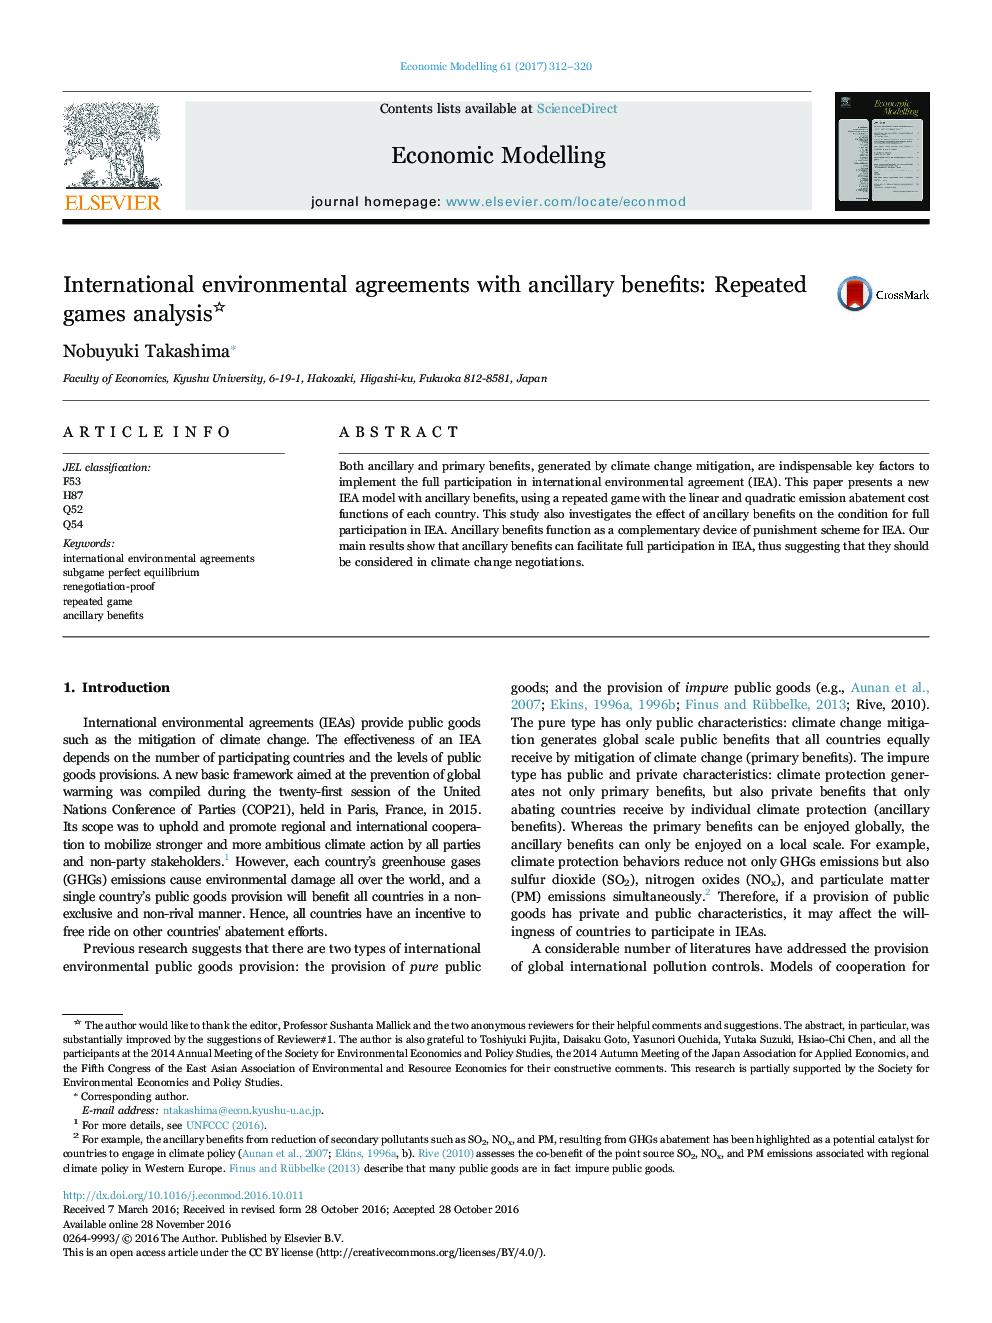 International environmental agreements with ancillary benefits: Repeated games analysis